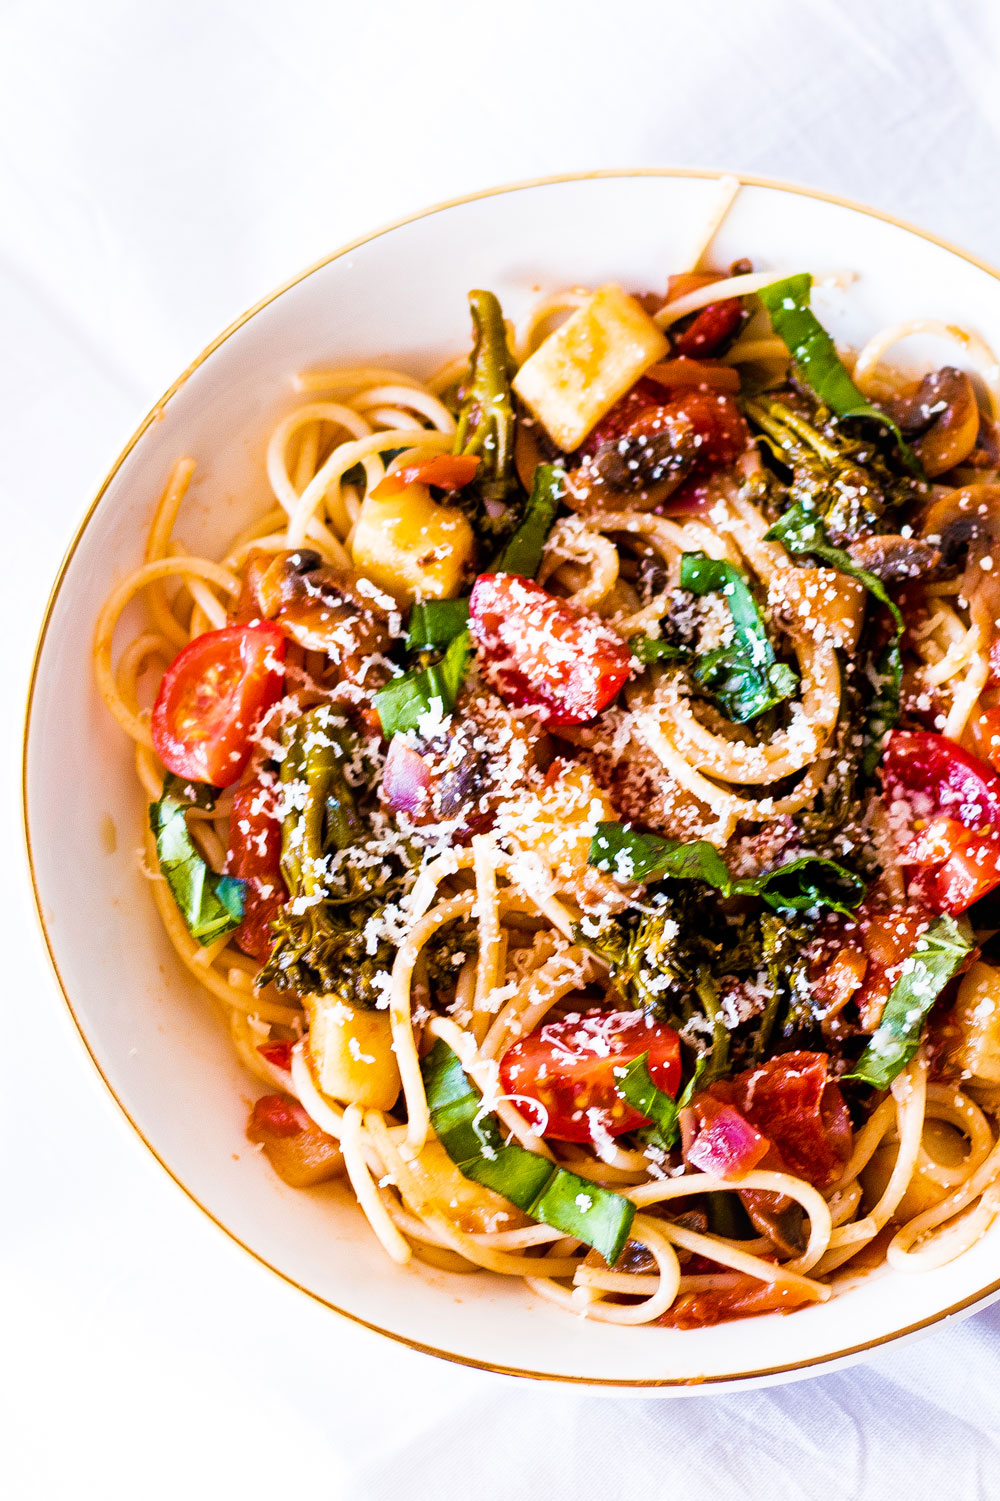 Whip up our easy Rustic Tomato Basil Vegetable Pasta in just 30 minutes. It's simple to make, delivers on flavor, and packs three of your 5-a-day into one delicious meal. https://www.spotebi.com/recipes/rustic-tomato-basil-vegetable-pasta/